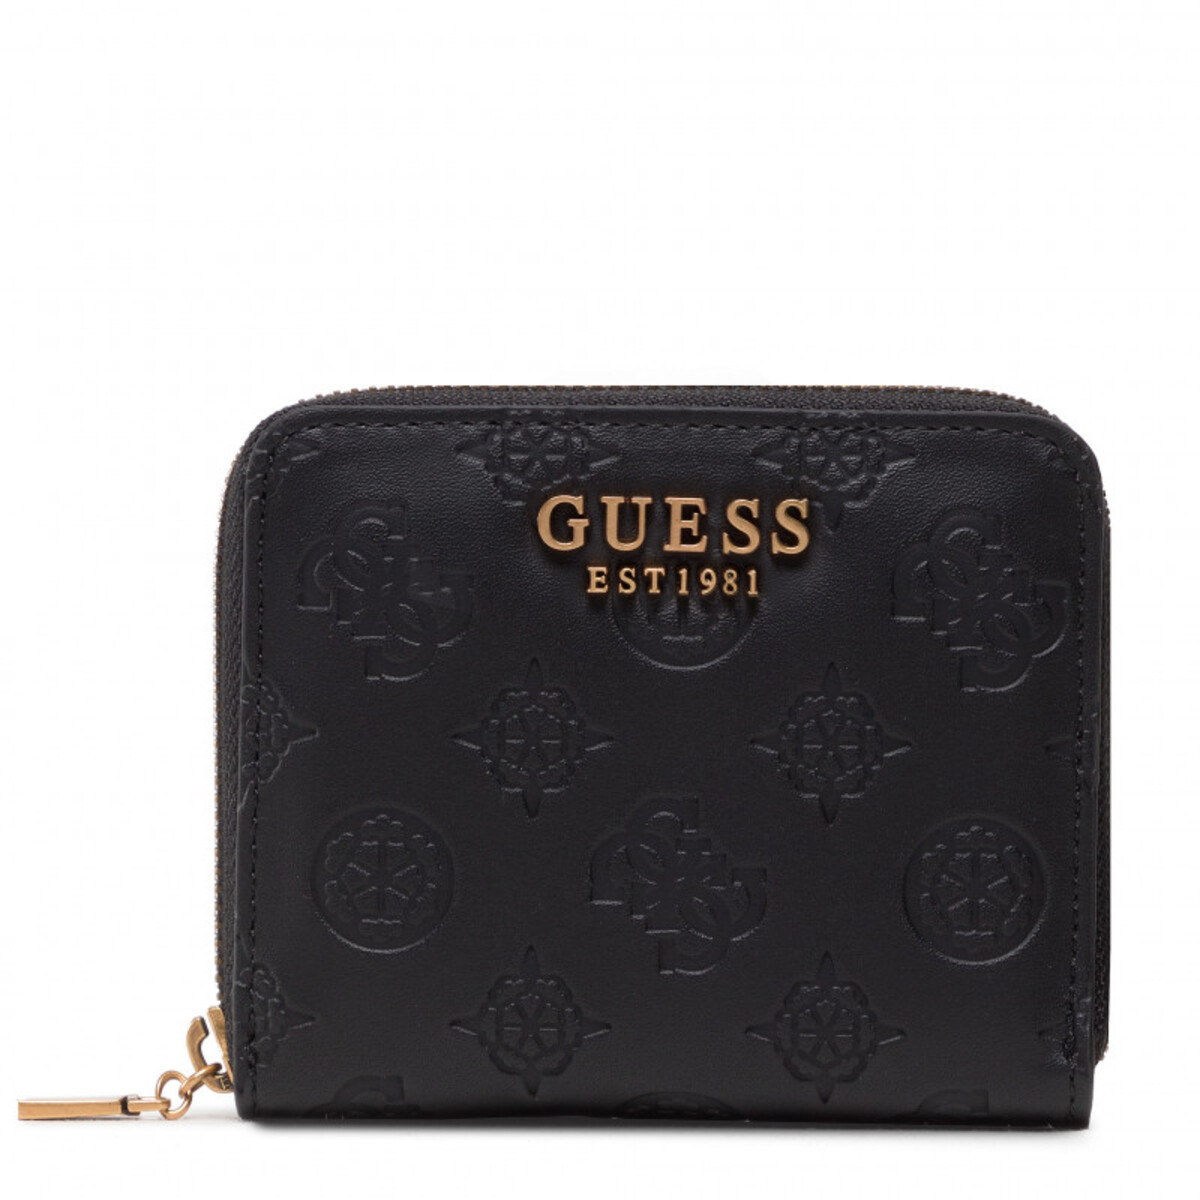 Guess G VIBE SLG SMALL ZIP AROUND